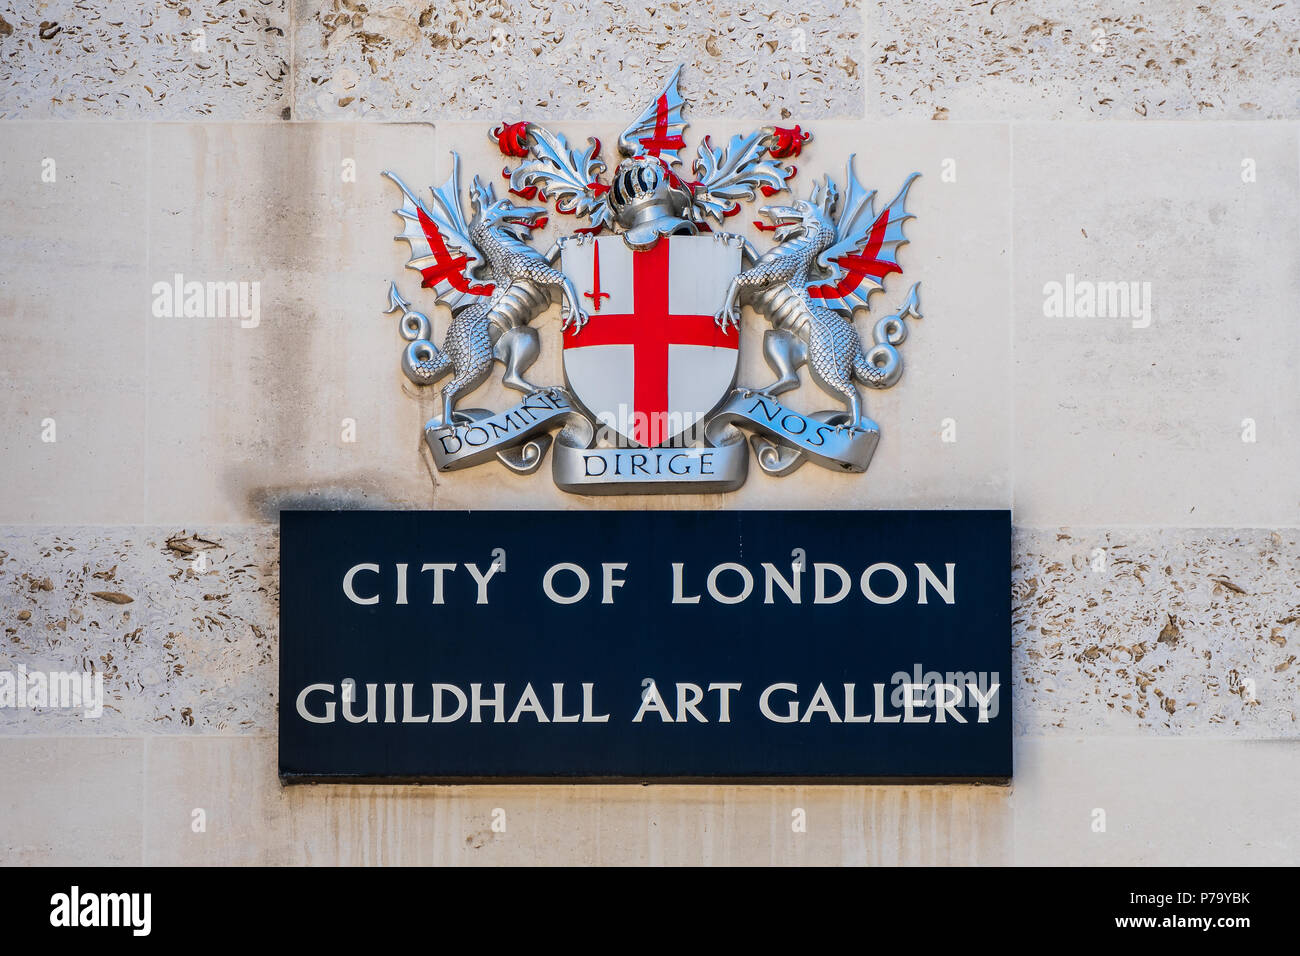 LONDON, UNITED KINGDOM - MAY 15 2018: Guildhall Art Gallery built in 1885 on the site of London's Roman amphitheatre (discovered in 1985), houses the  Stock Photo